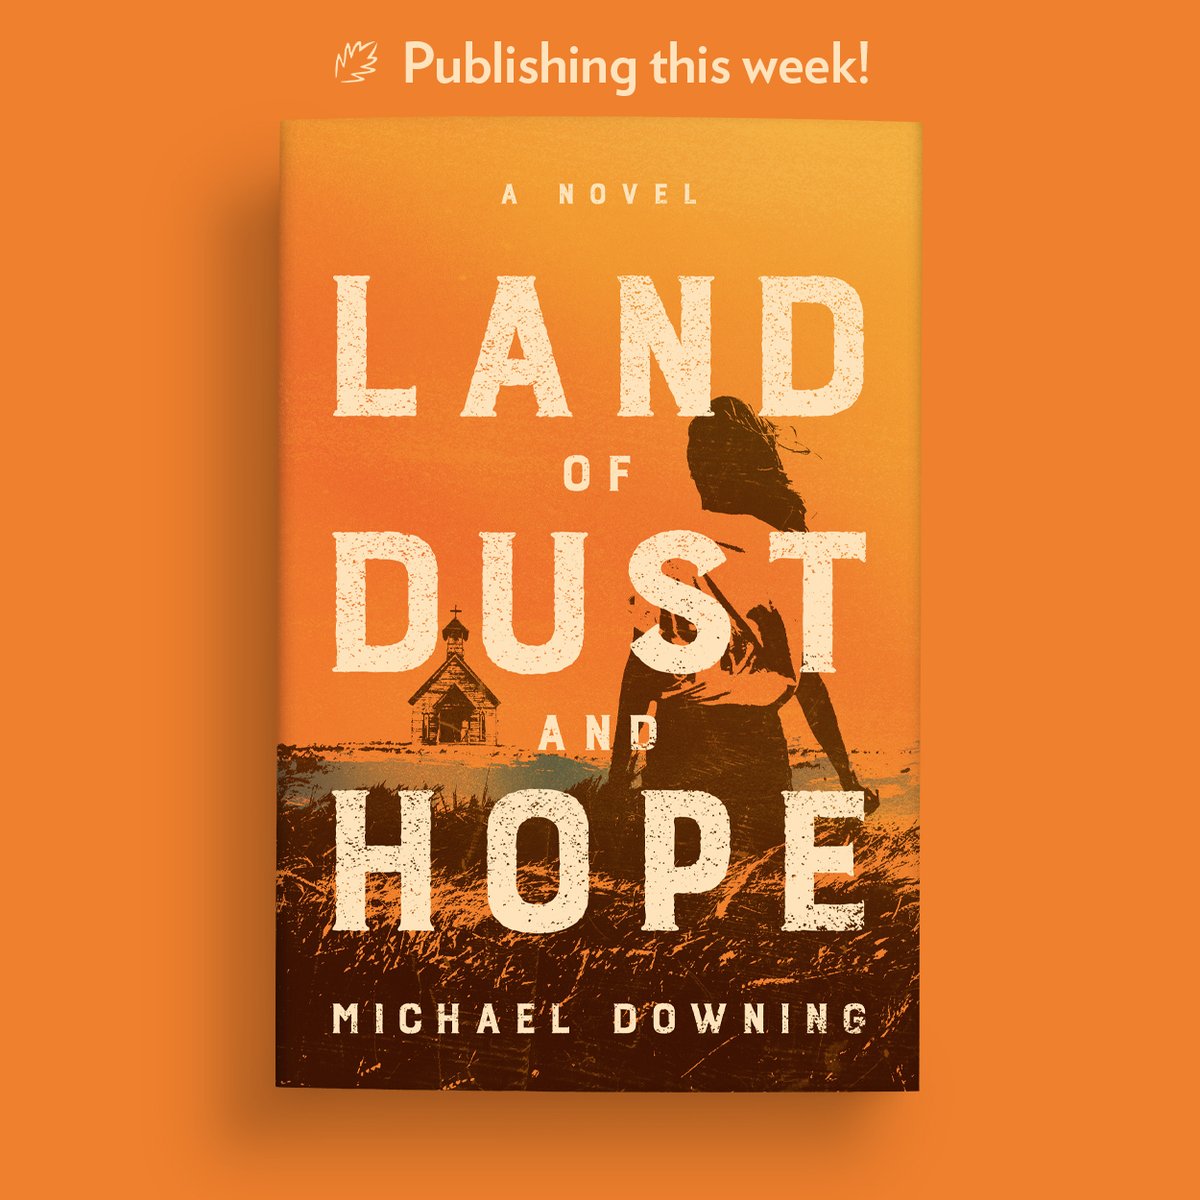 Another Tuesday, another #PubDay!

📙 Land of Dust and Hope by Michael Downing
With poignancy and humor, it illustrates the resilience of the human spirit in its depiction of the experiences of people who are desperately trying to cross the US border.
amazon.com/Land-Dust-Hope…